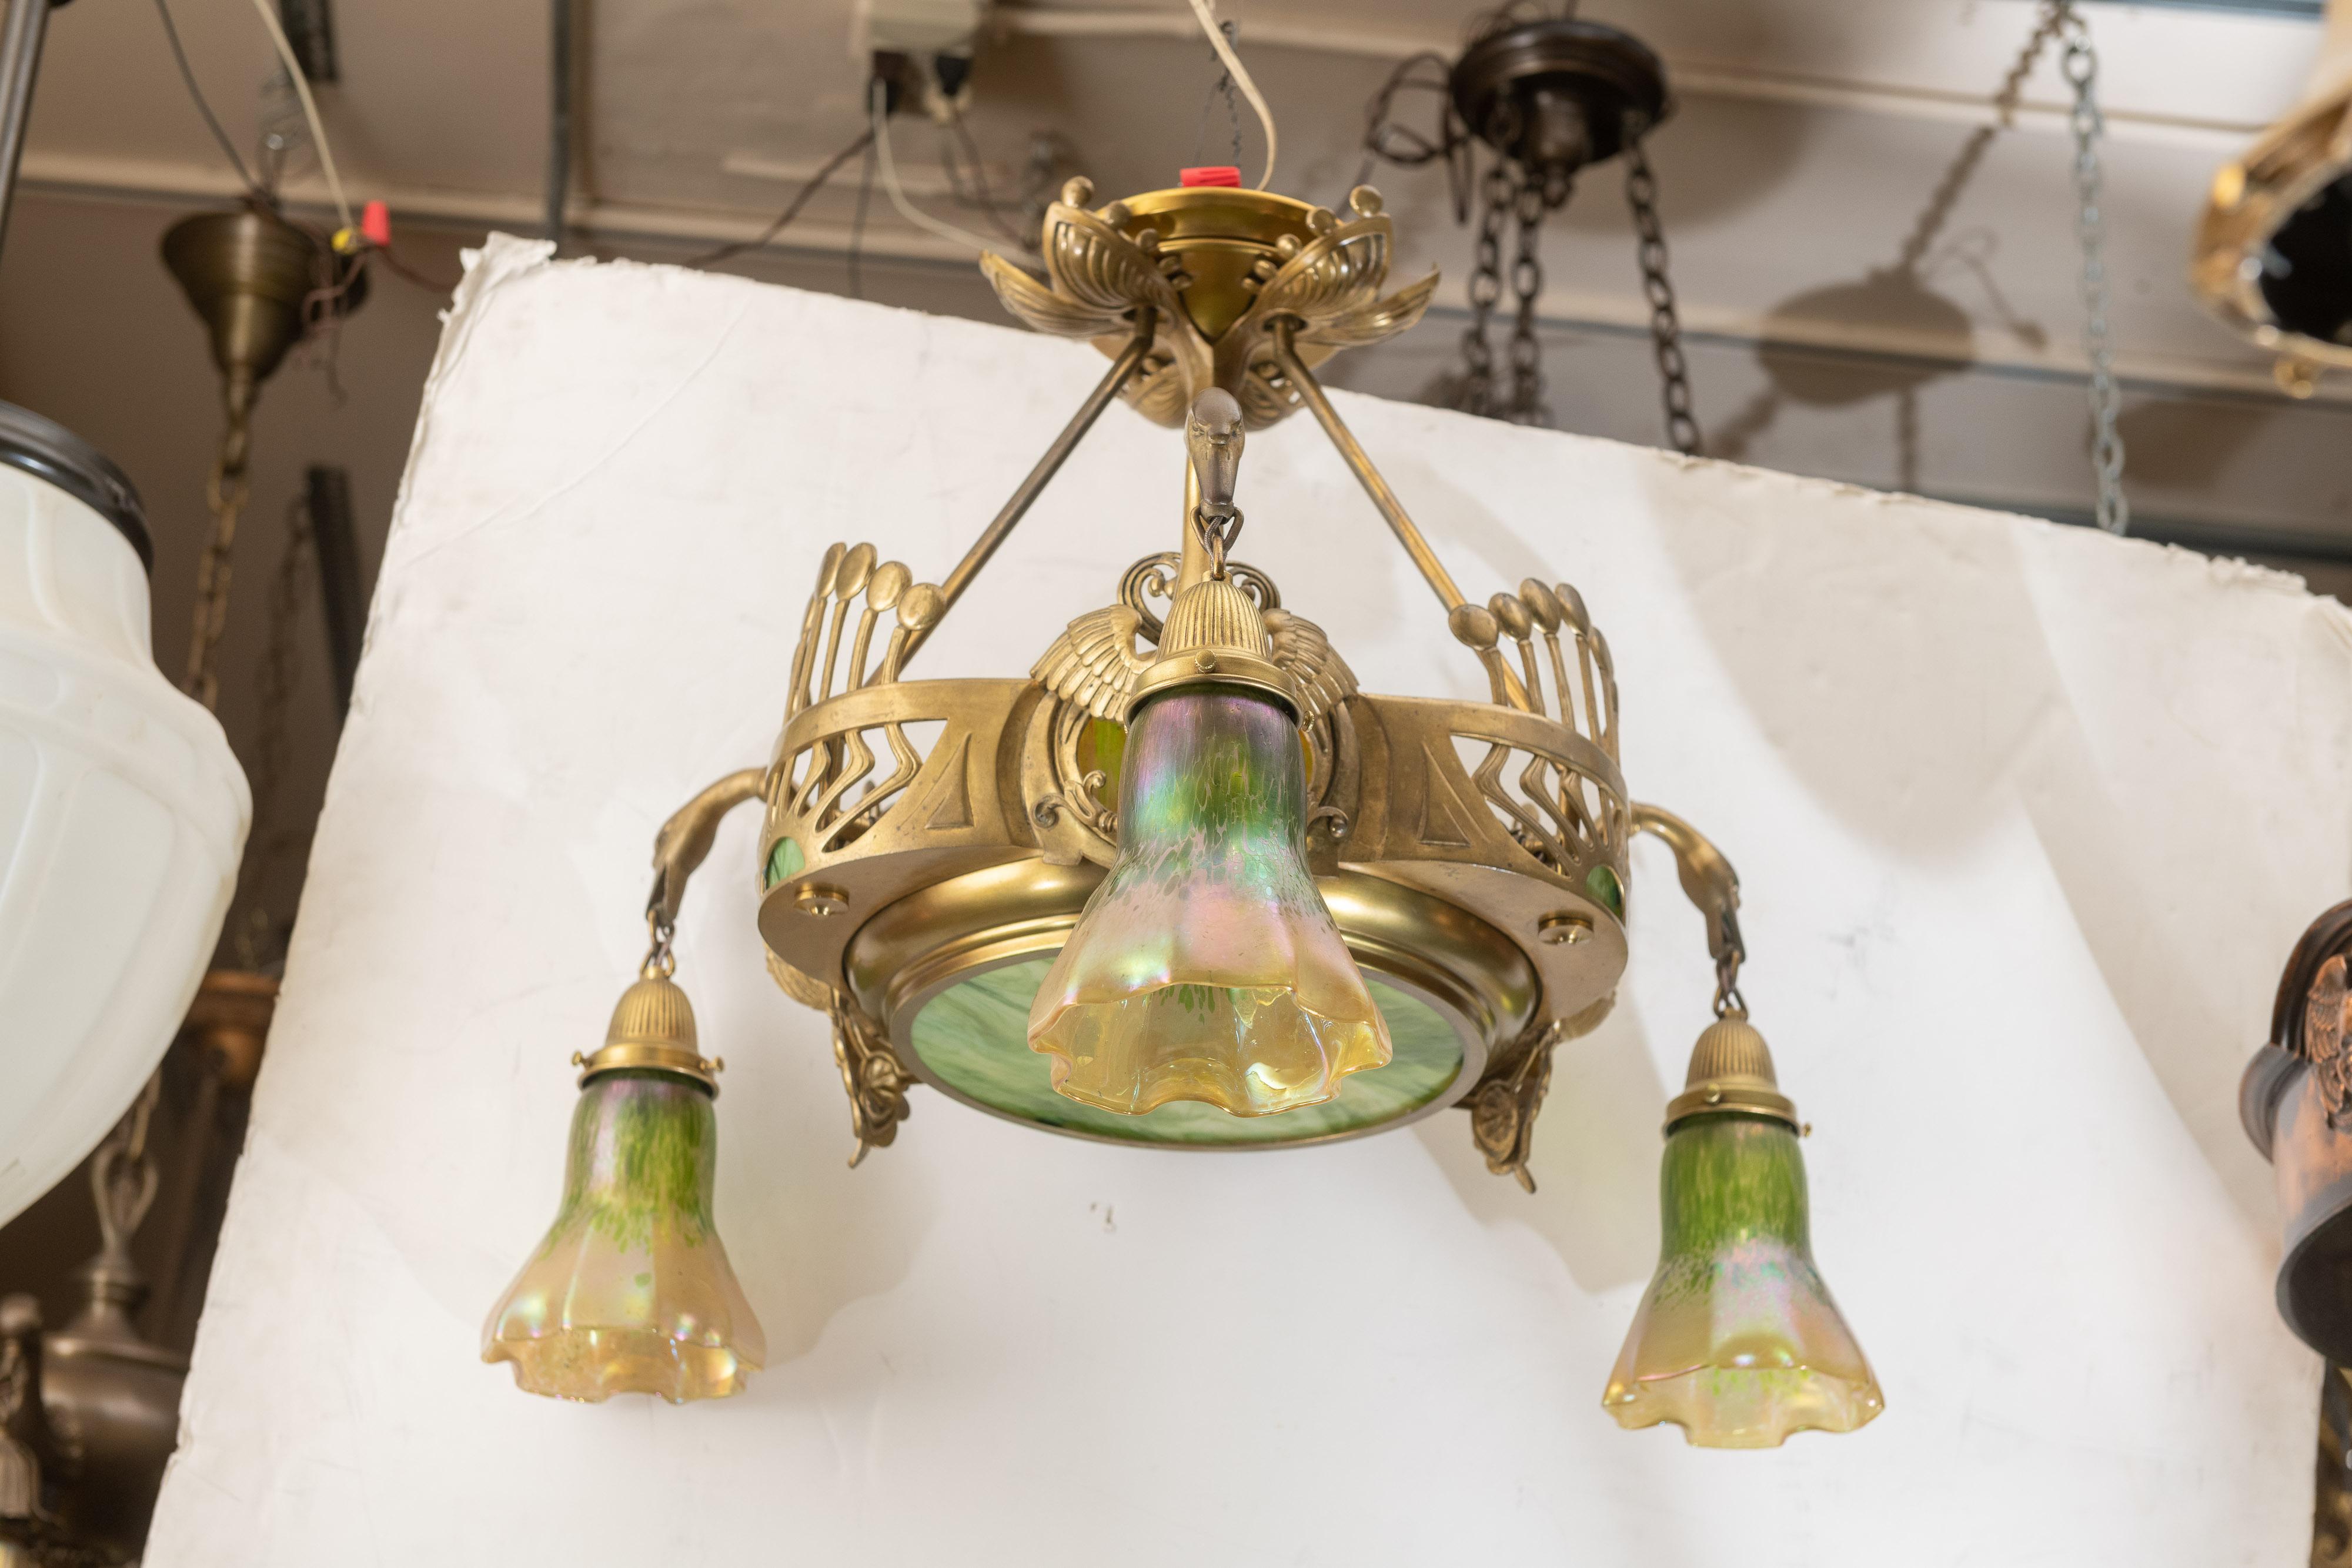 We are offering an exceptional piece of antique lighting. So many nice features. The glass shades are hand blown art glass and probably done by Loetz. The areas of flat glass are a match. The cast swans are probably the most notable work on this